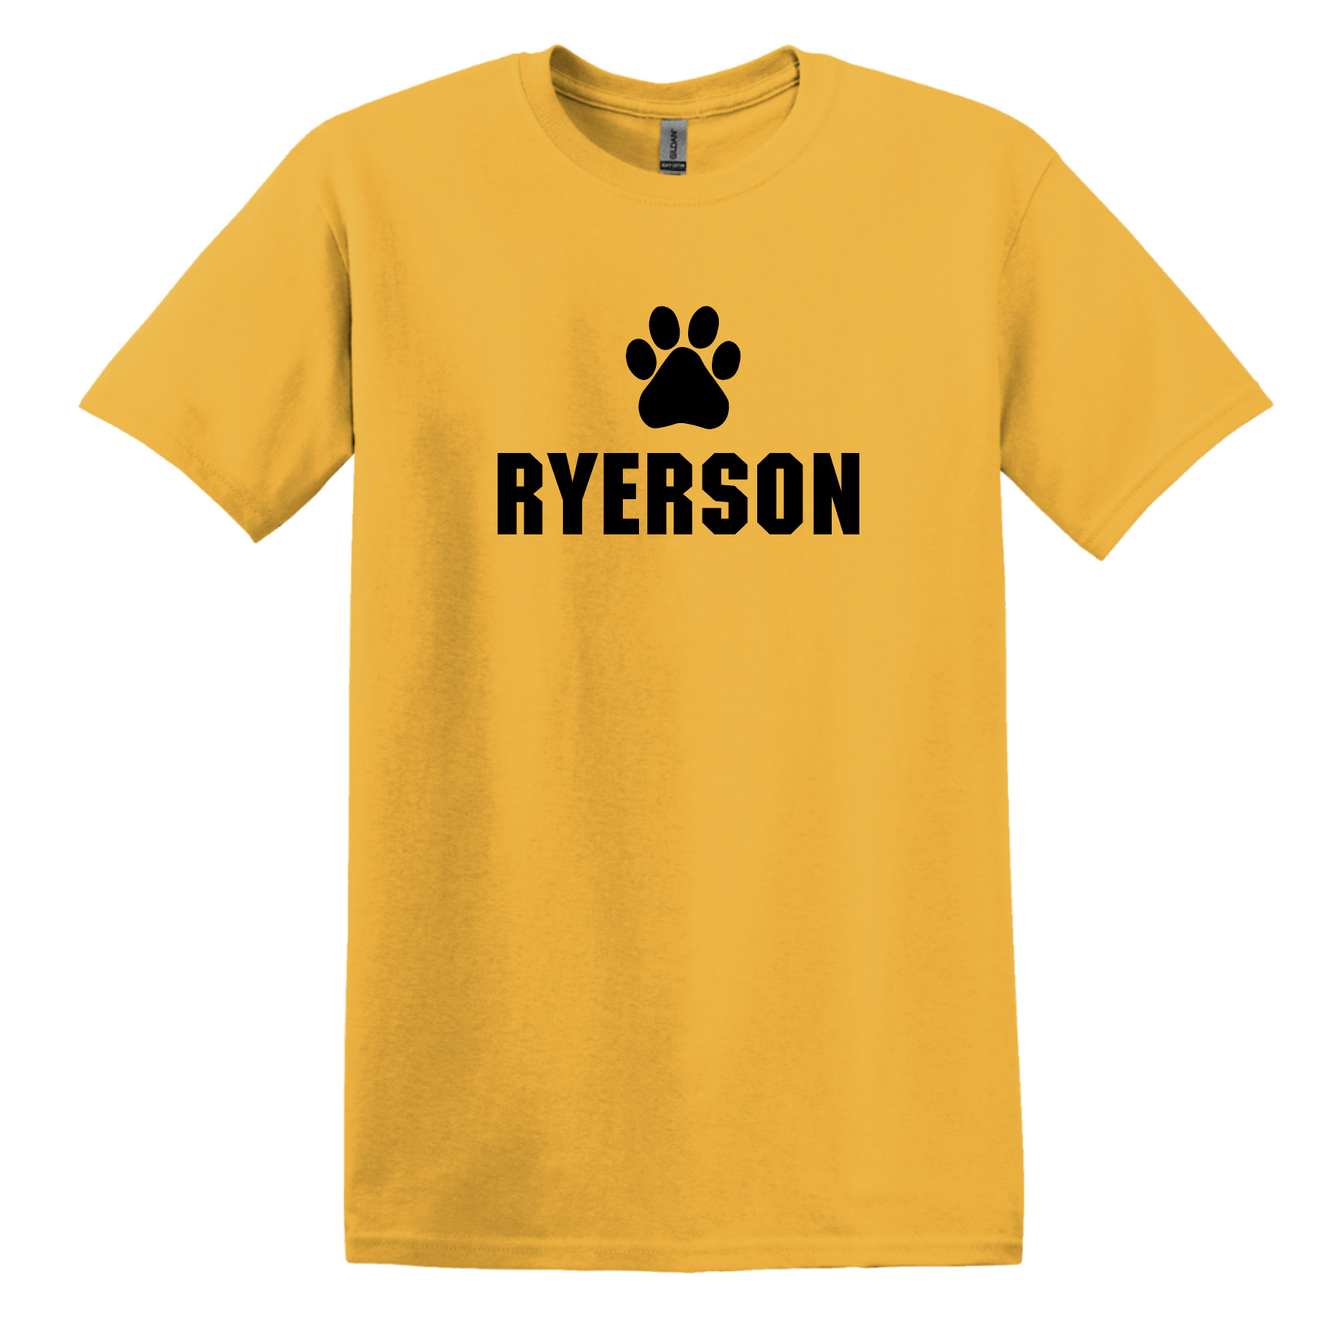 Ryerson - Youth Cotton Tee